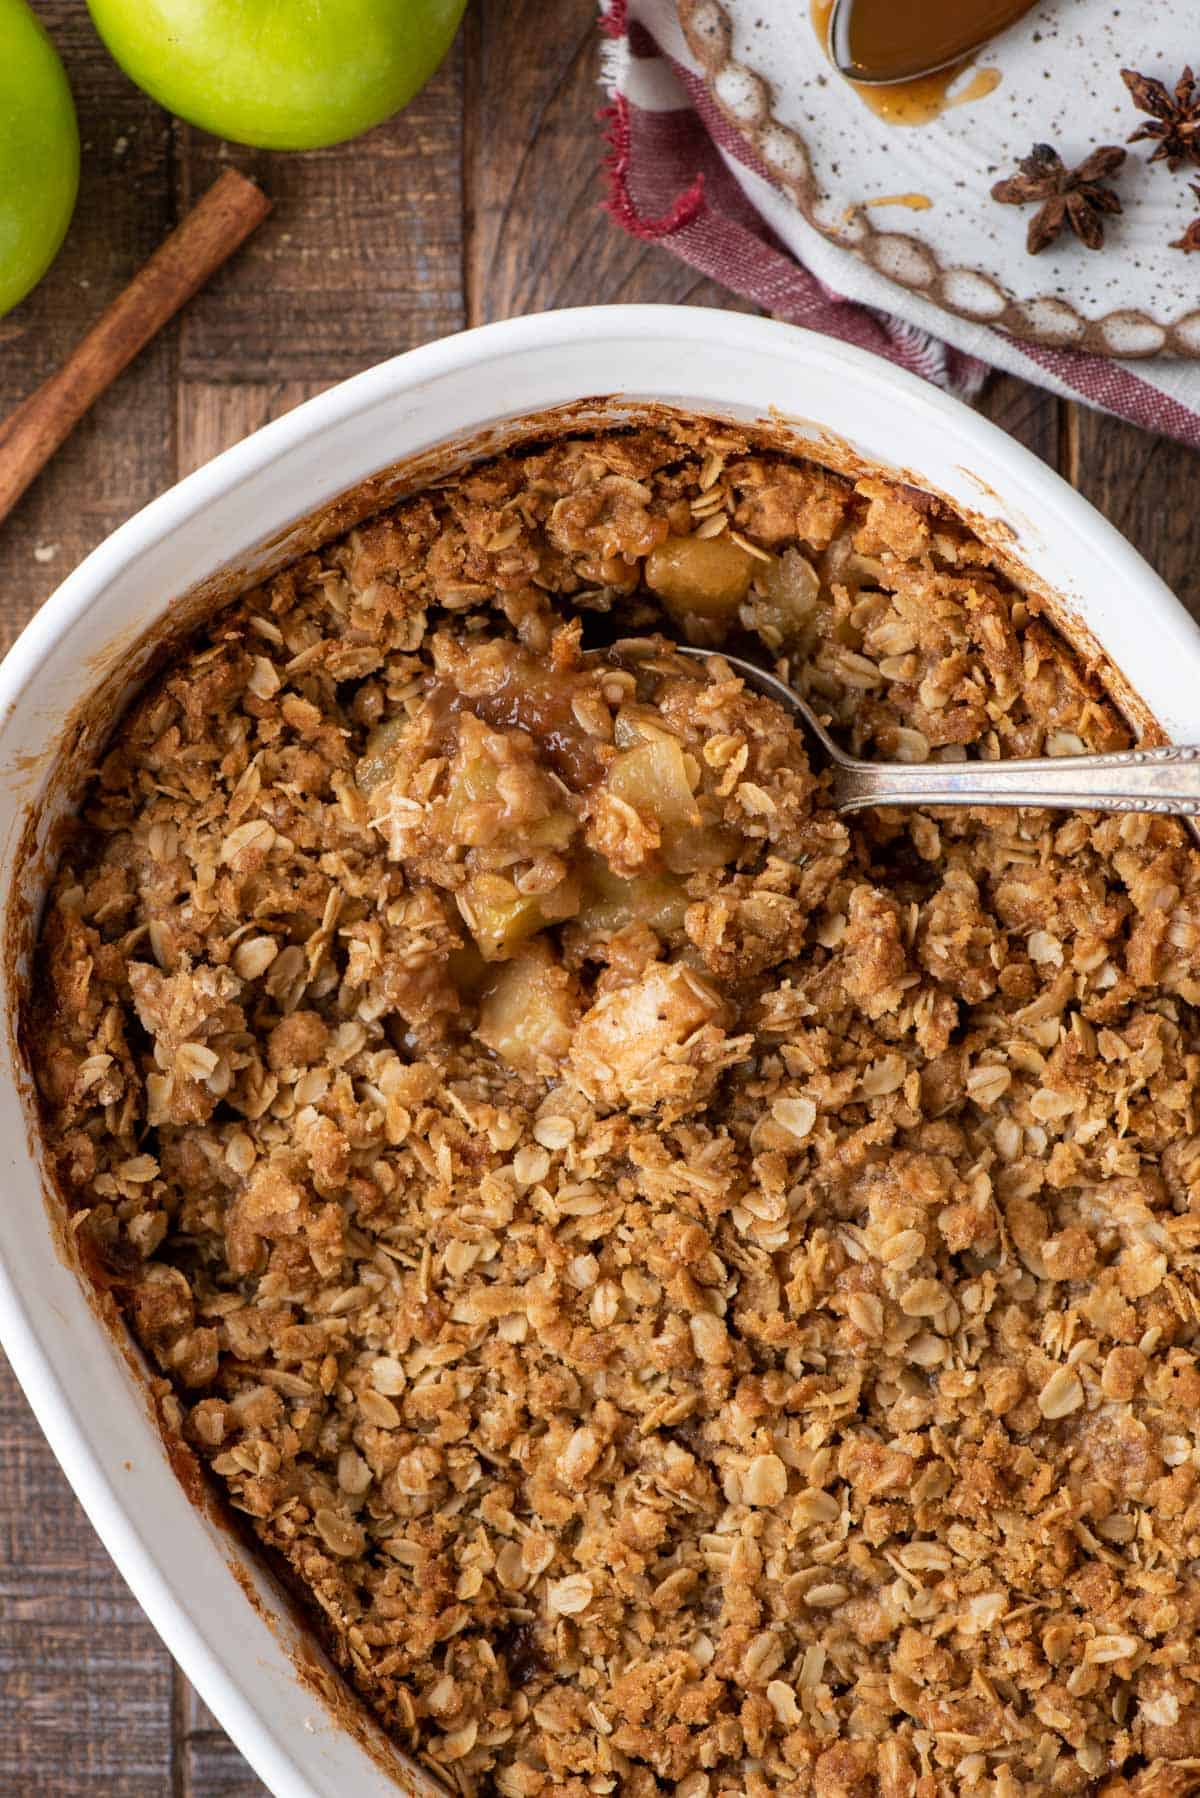 Overhead view of caramel apple crisp in baking dish with spoon